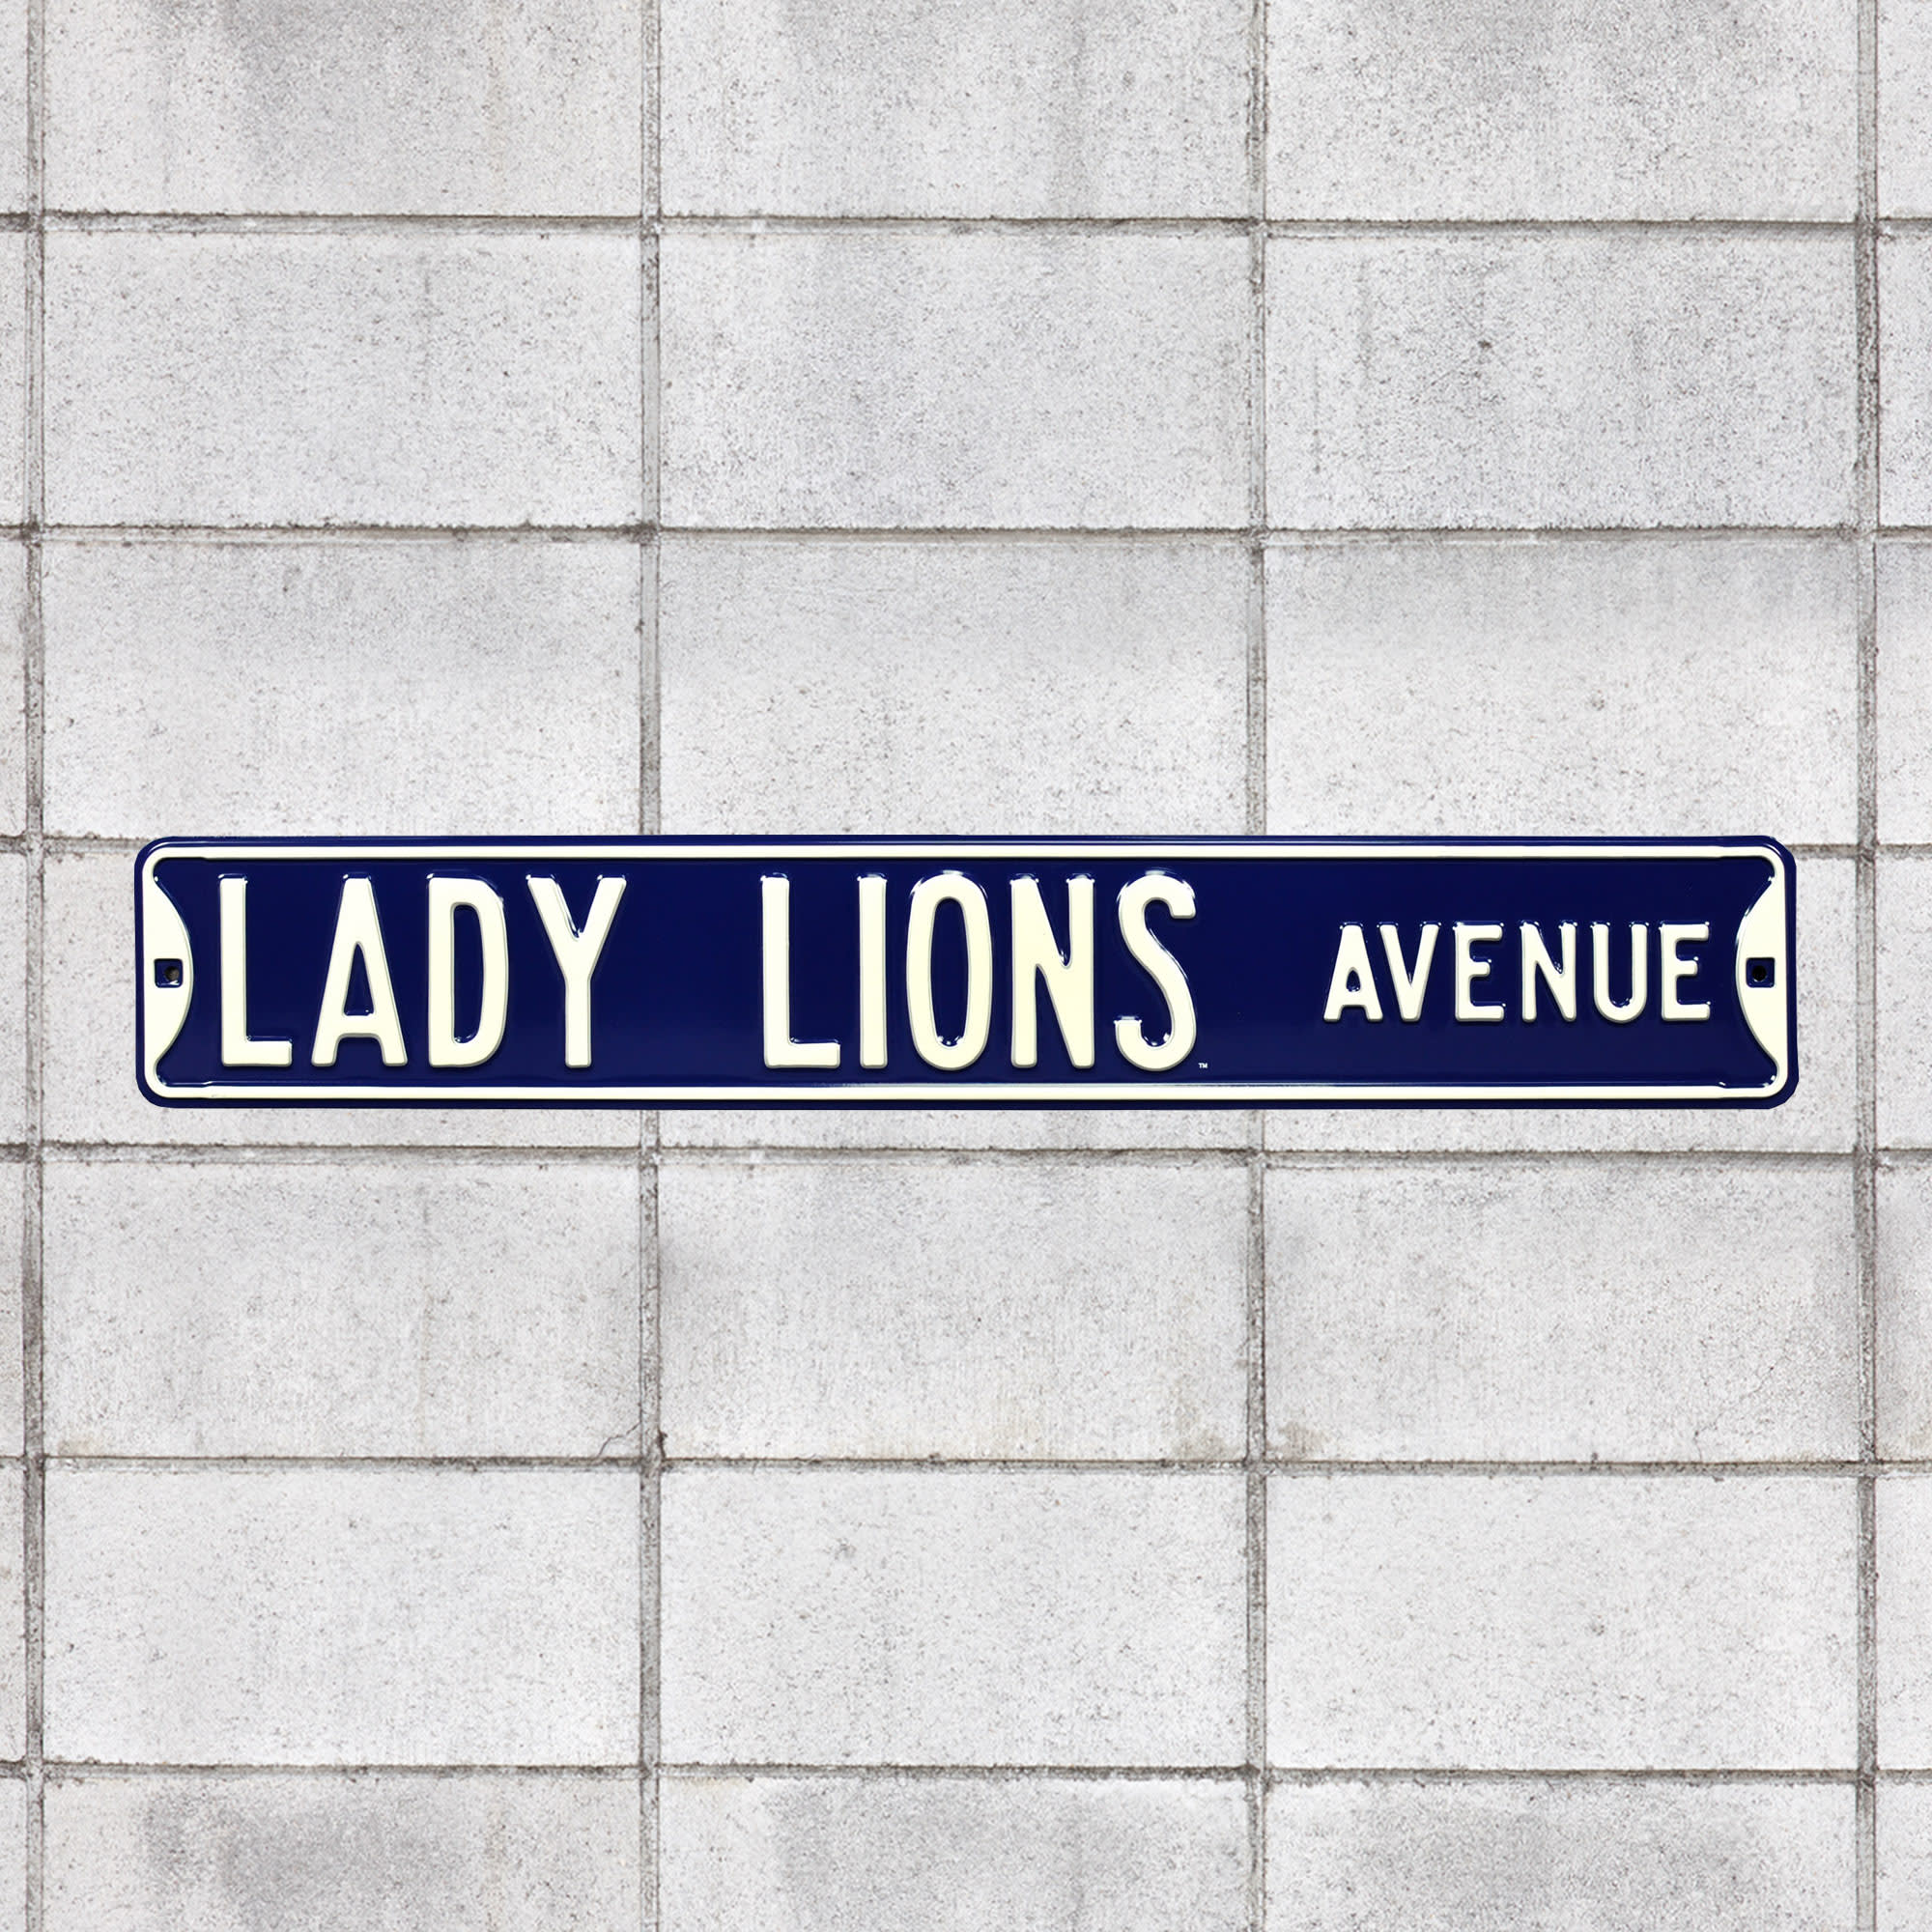 Penn State Nittany Lions: Penn State Nittany Lions Avenue - Officially Licensed Metal Street Sign 36.0"W x 6.0"H by Fathead | 10